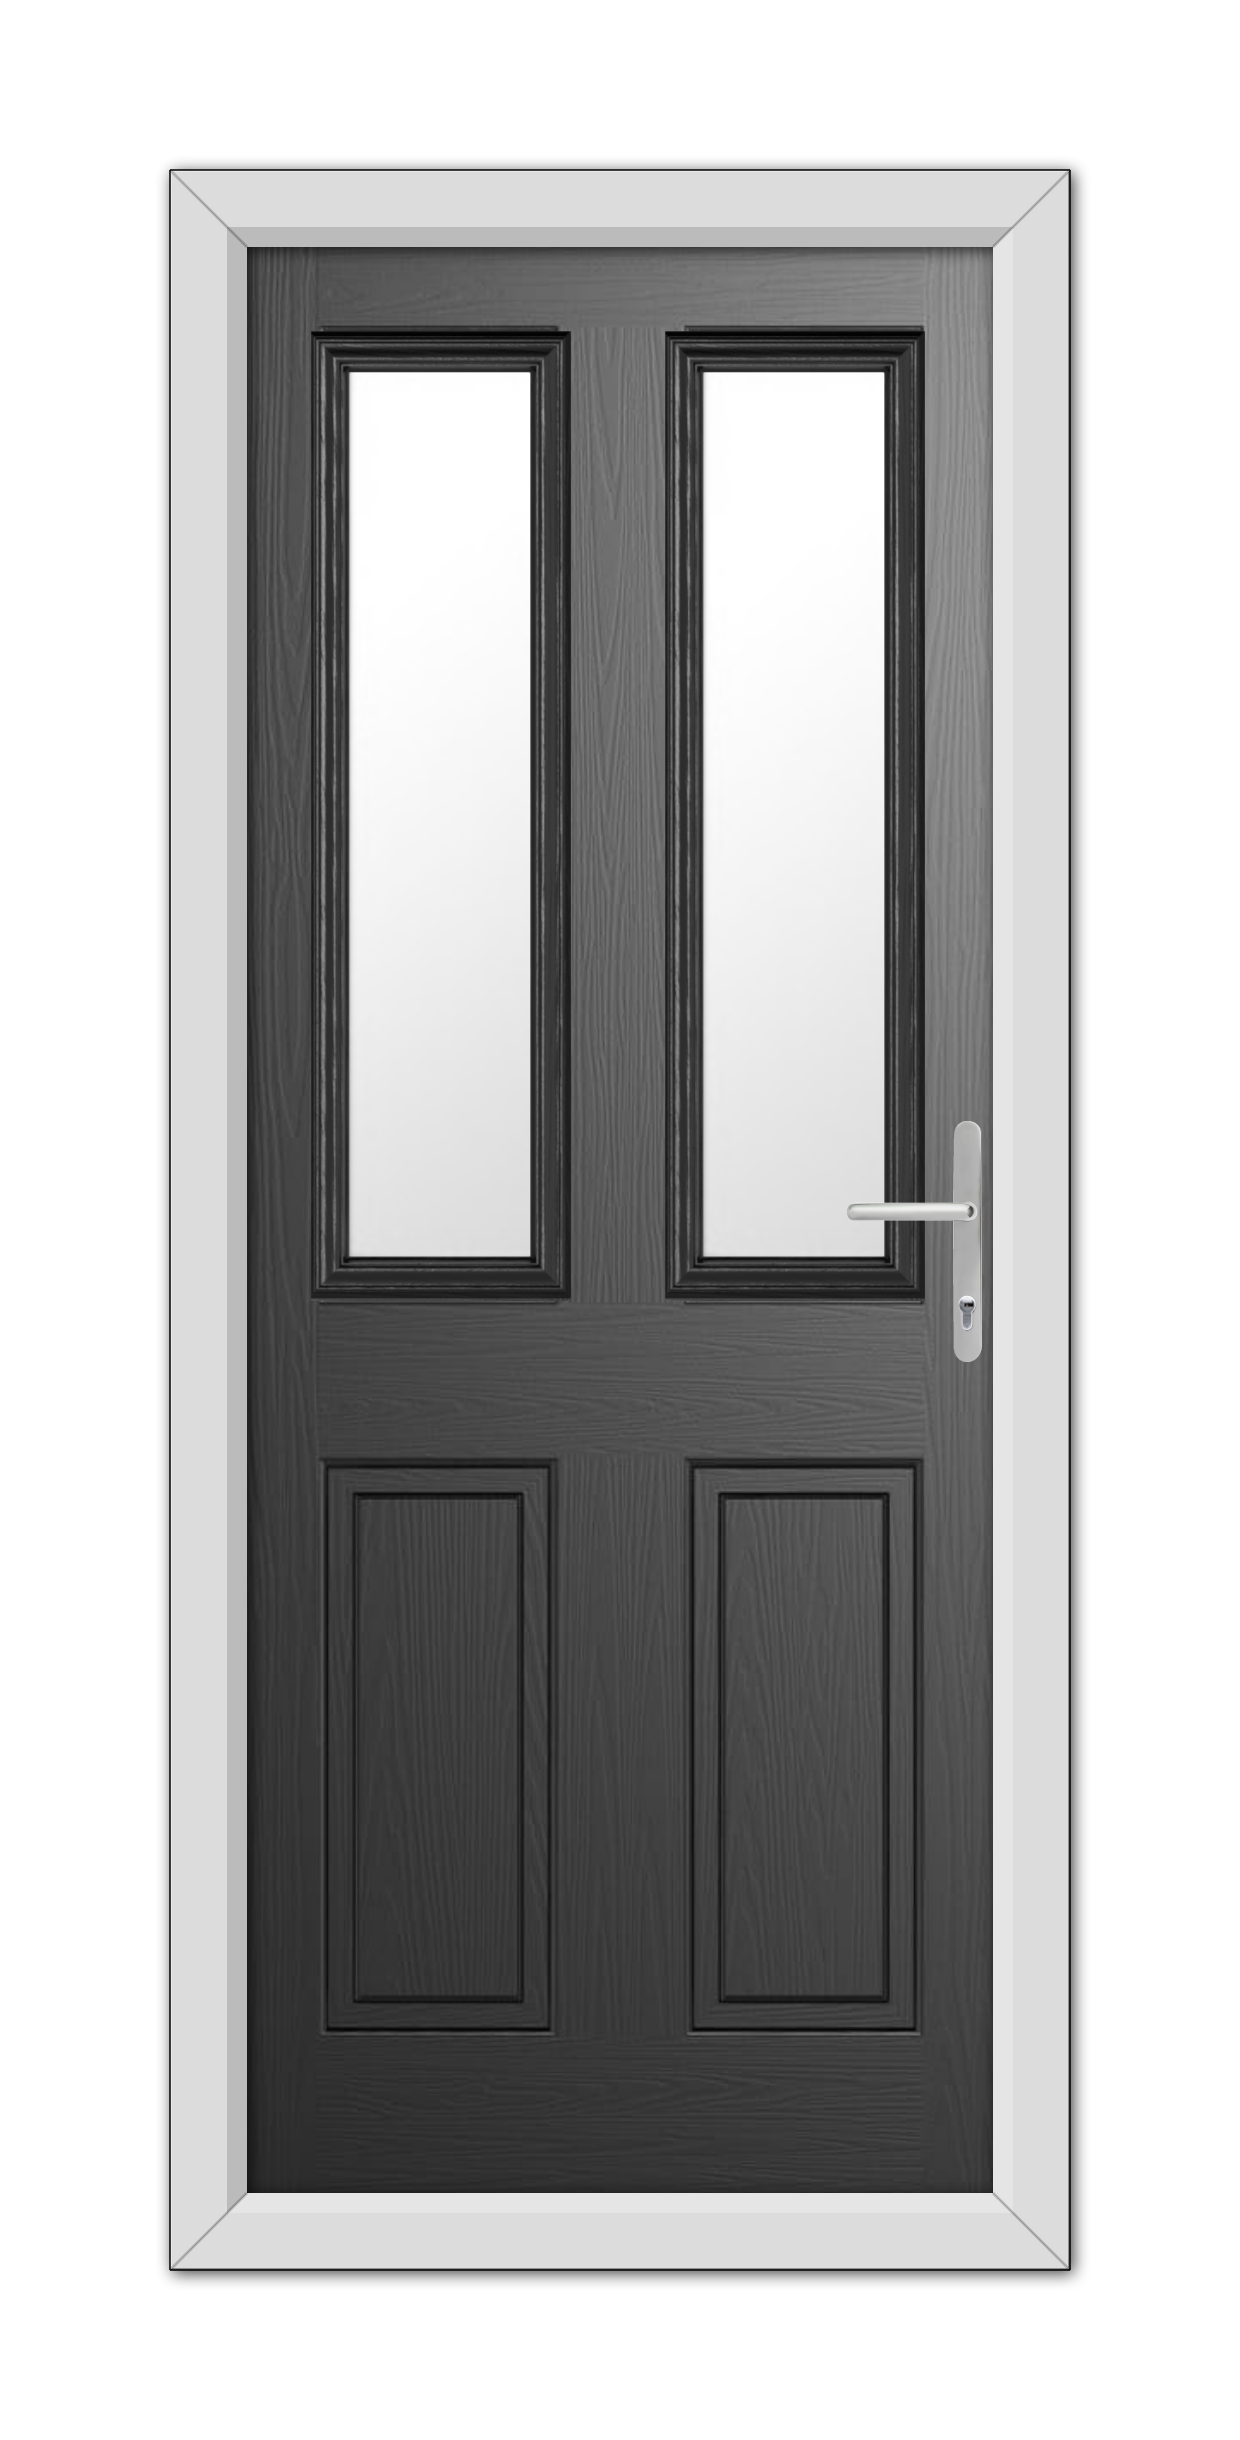 A modern Black Whitmore Composite Door 48mm Timber Core with vertical glass panels and a metallic handle, framed in a white casing.